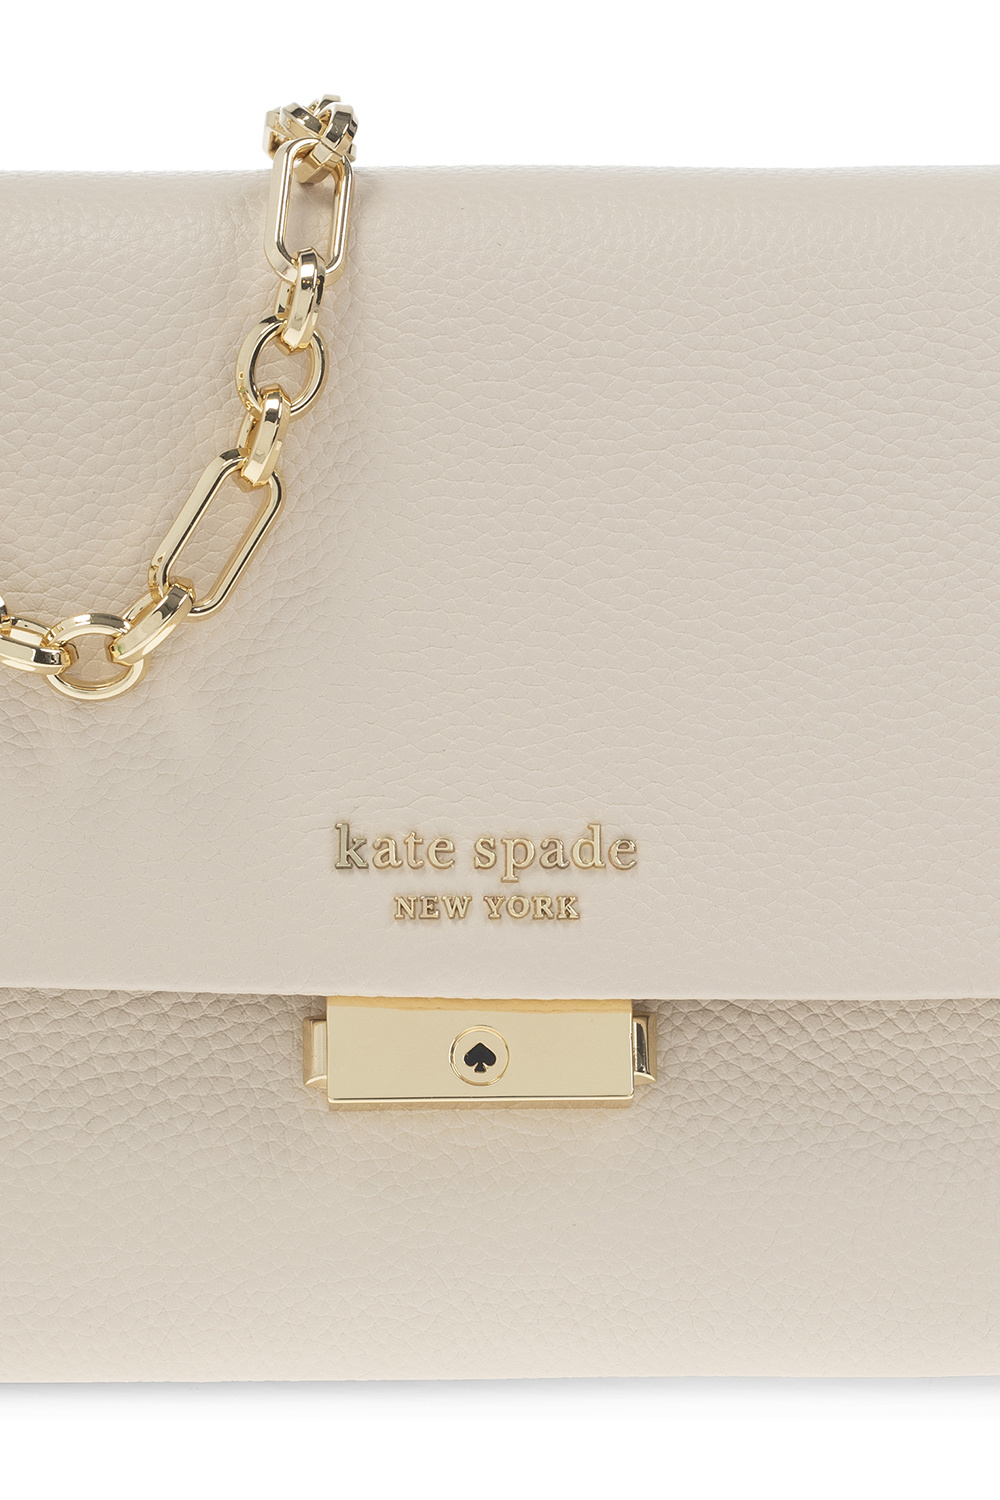 Kate Spade New York Cameron Street Chain 3 in 1 Clutch Shoulder